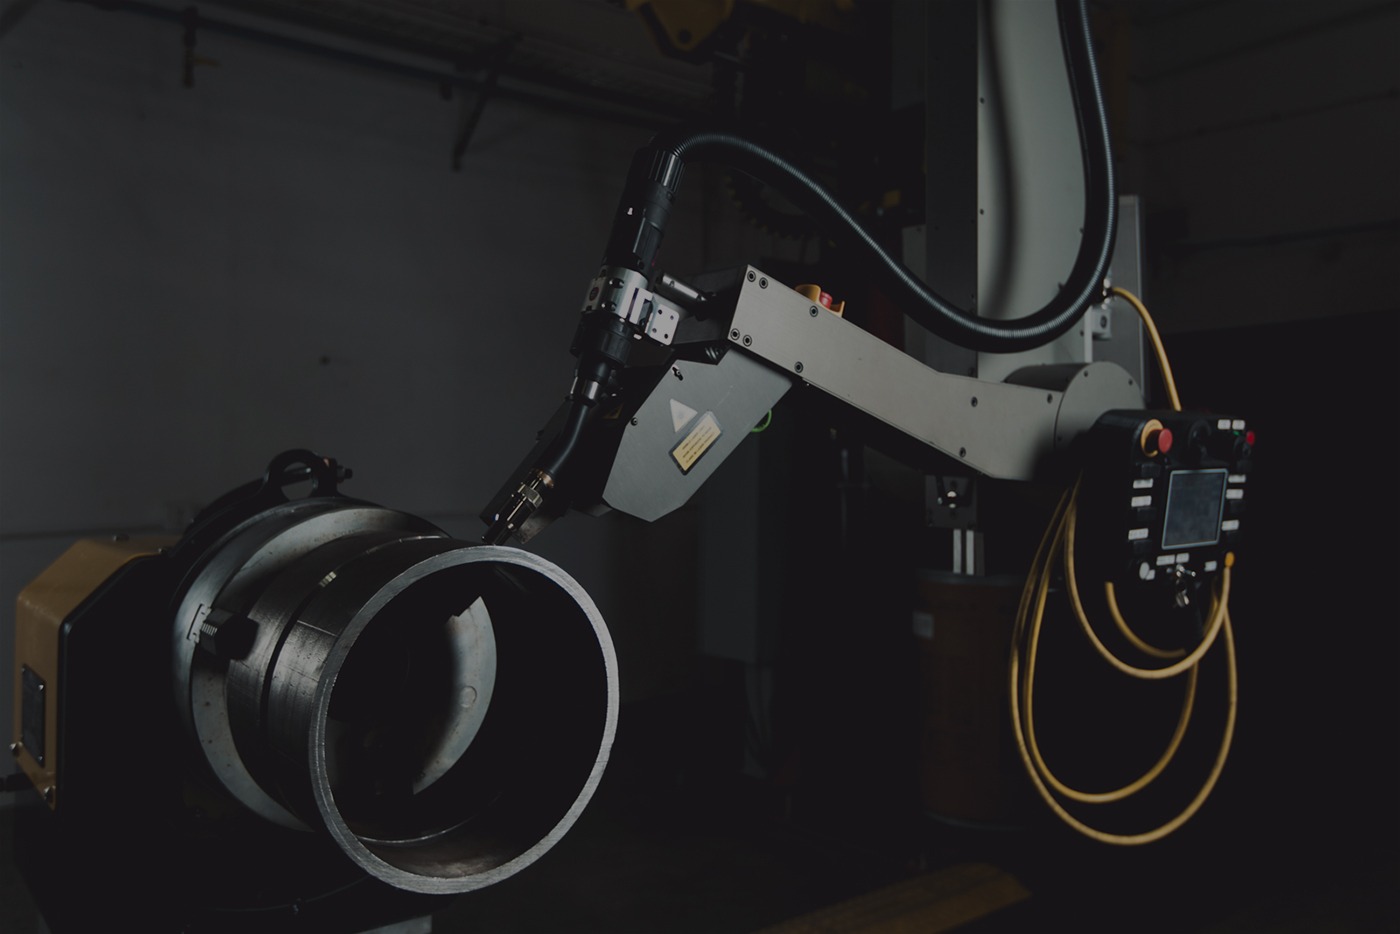 Novarc’s collaborative welding robot for accurate and cost-efficient 1G pipe welding